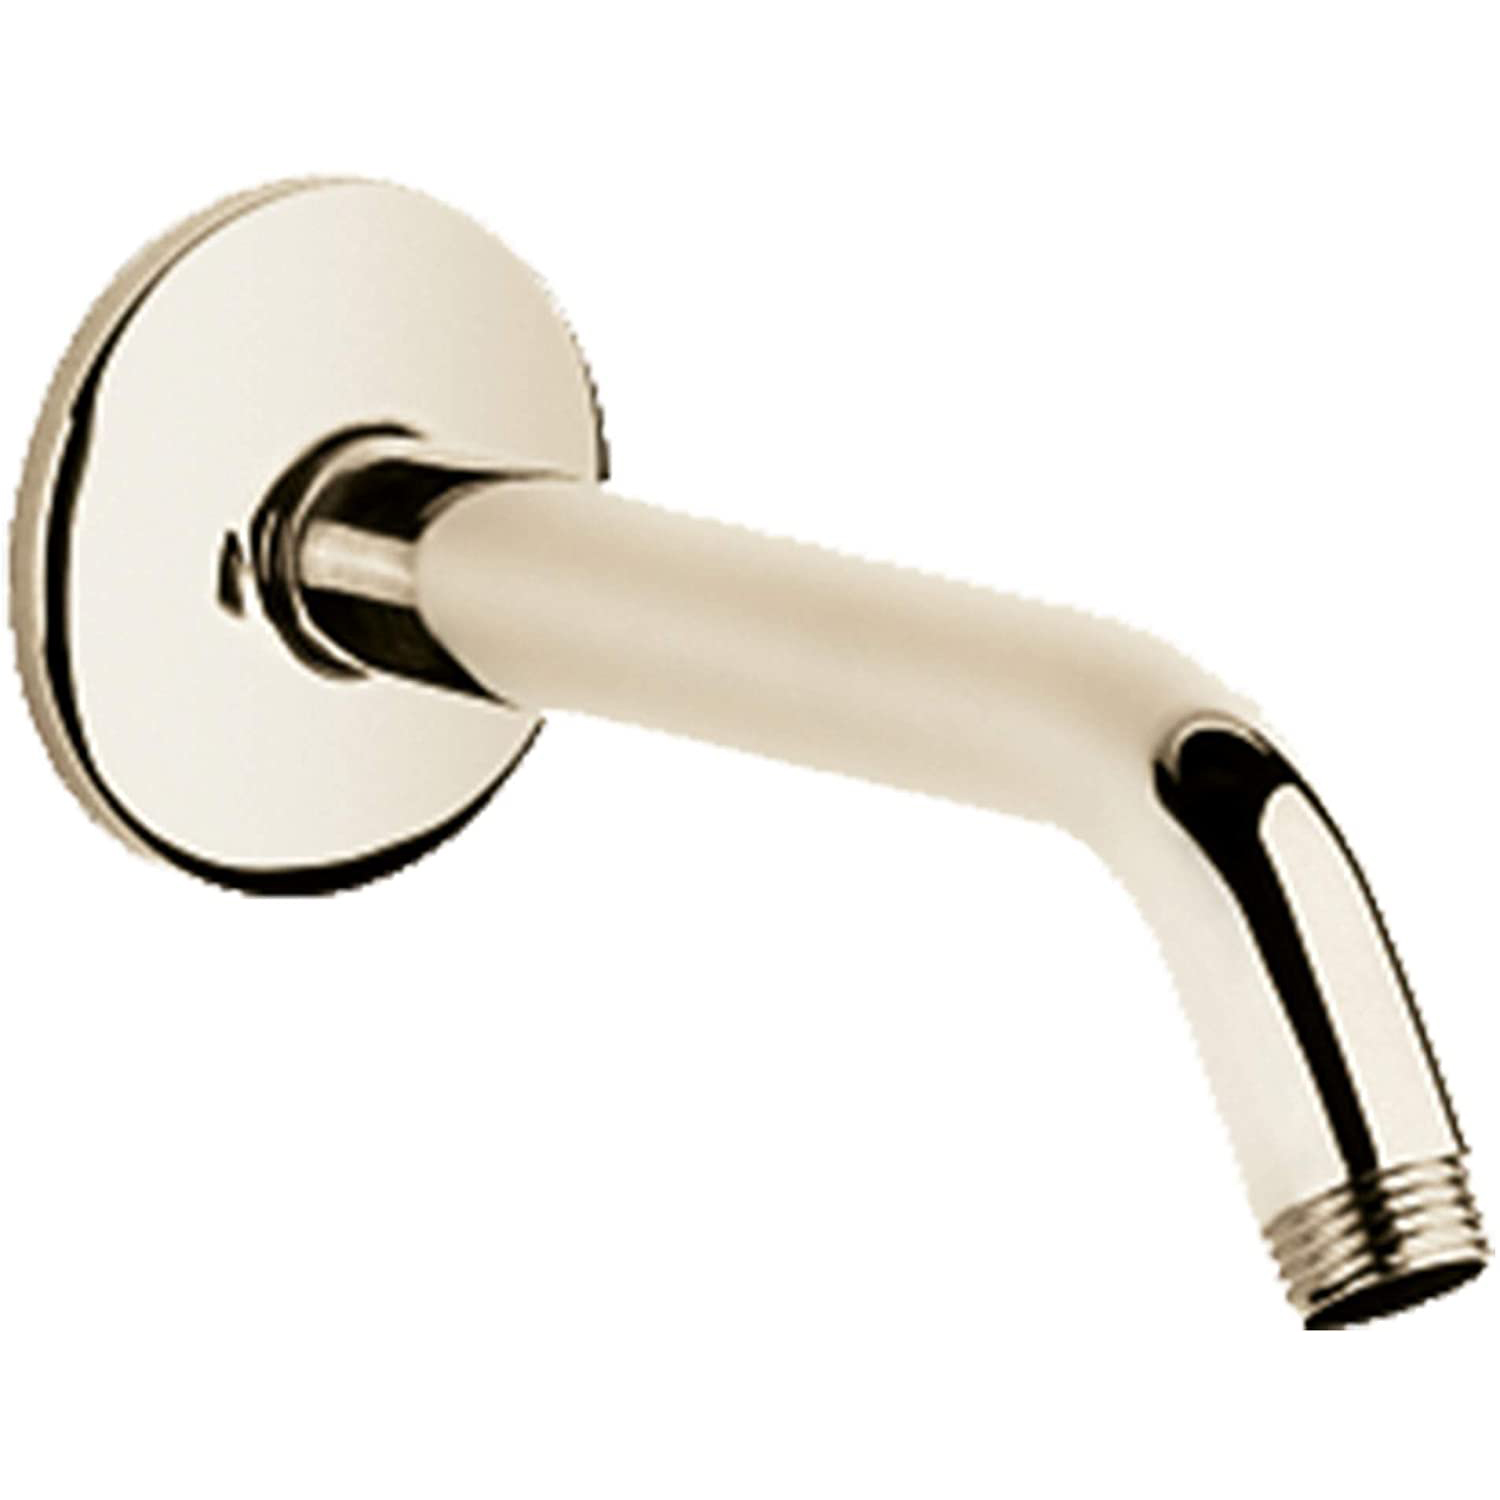 Relexa Wall Mount Shower Arm & Flange In Polished Nickel Infinity Finish